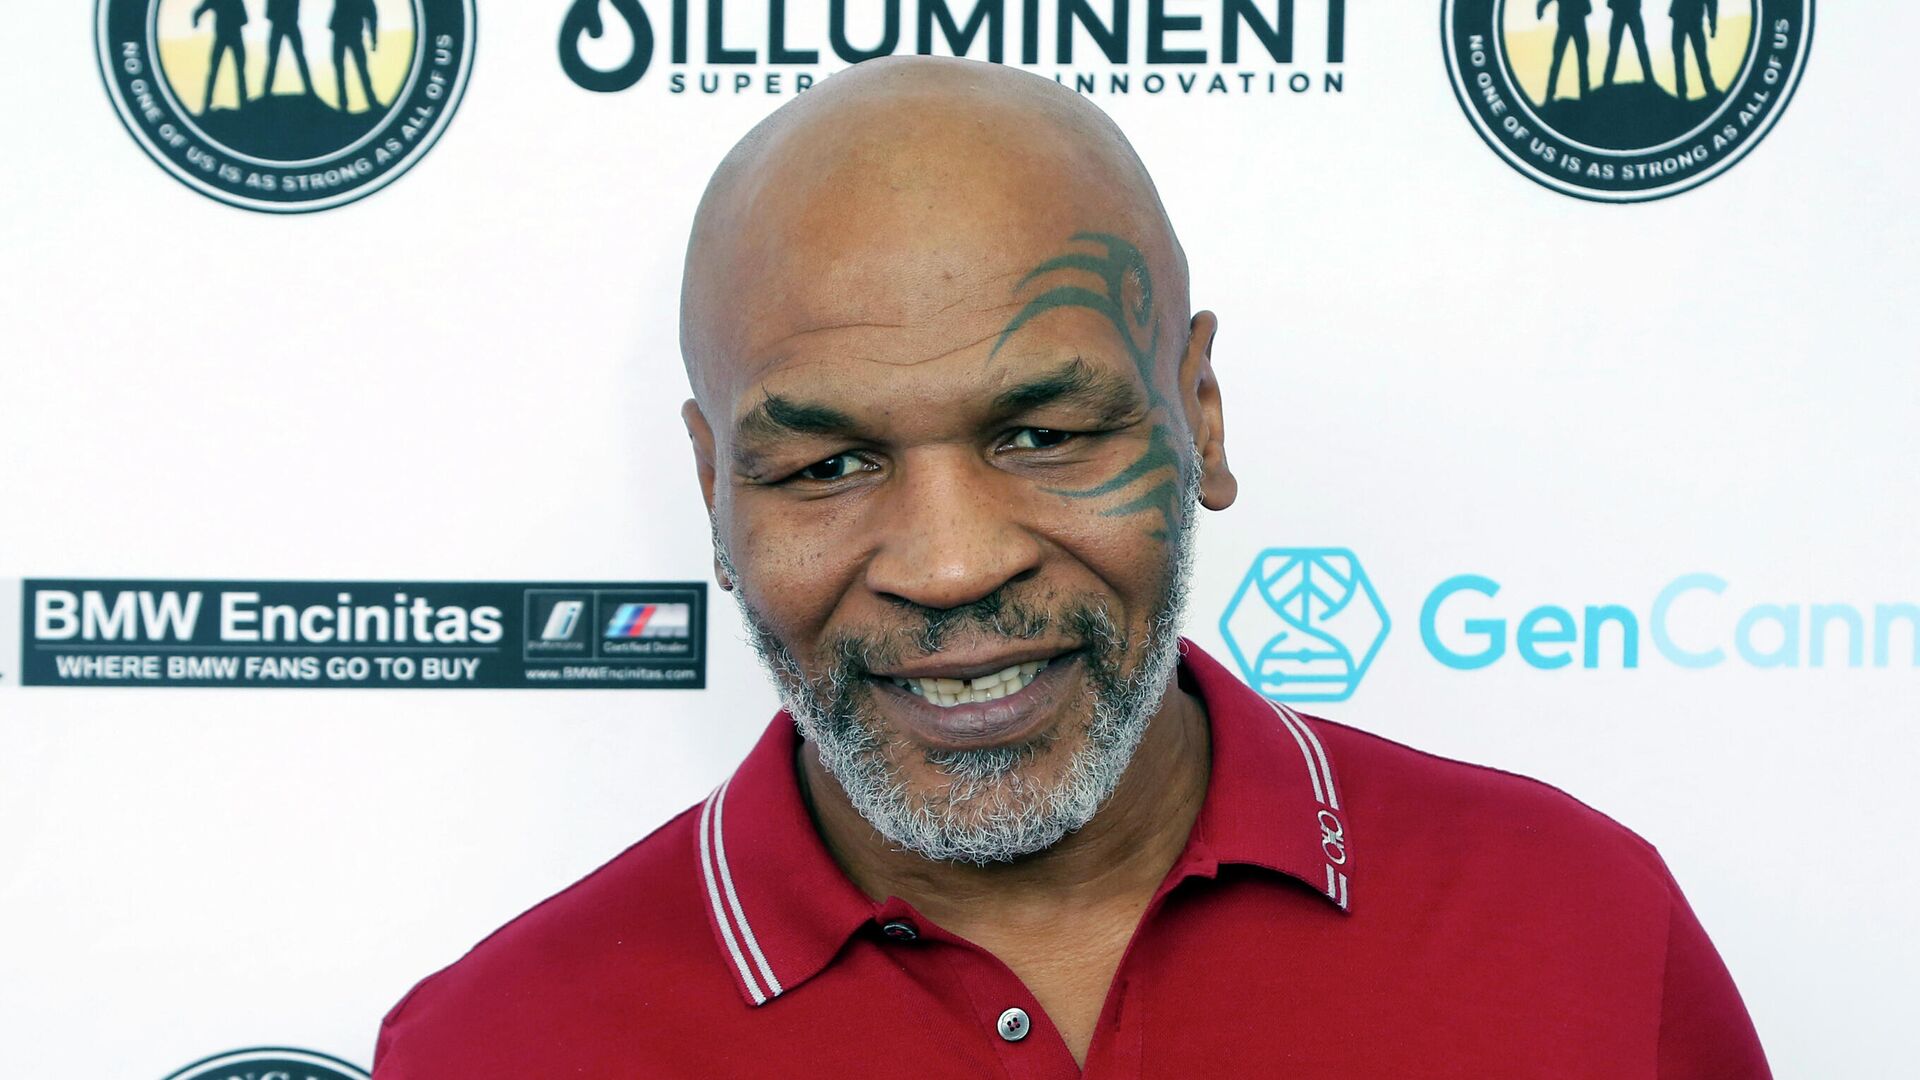 In this Aug. 2, 2019, file photo, Mike Tyson attends a celebrity golf tournament in Dana Point, Calif. - Sputnik International, 1920, 25.04.2022